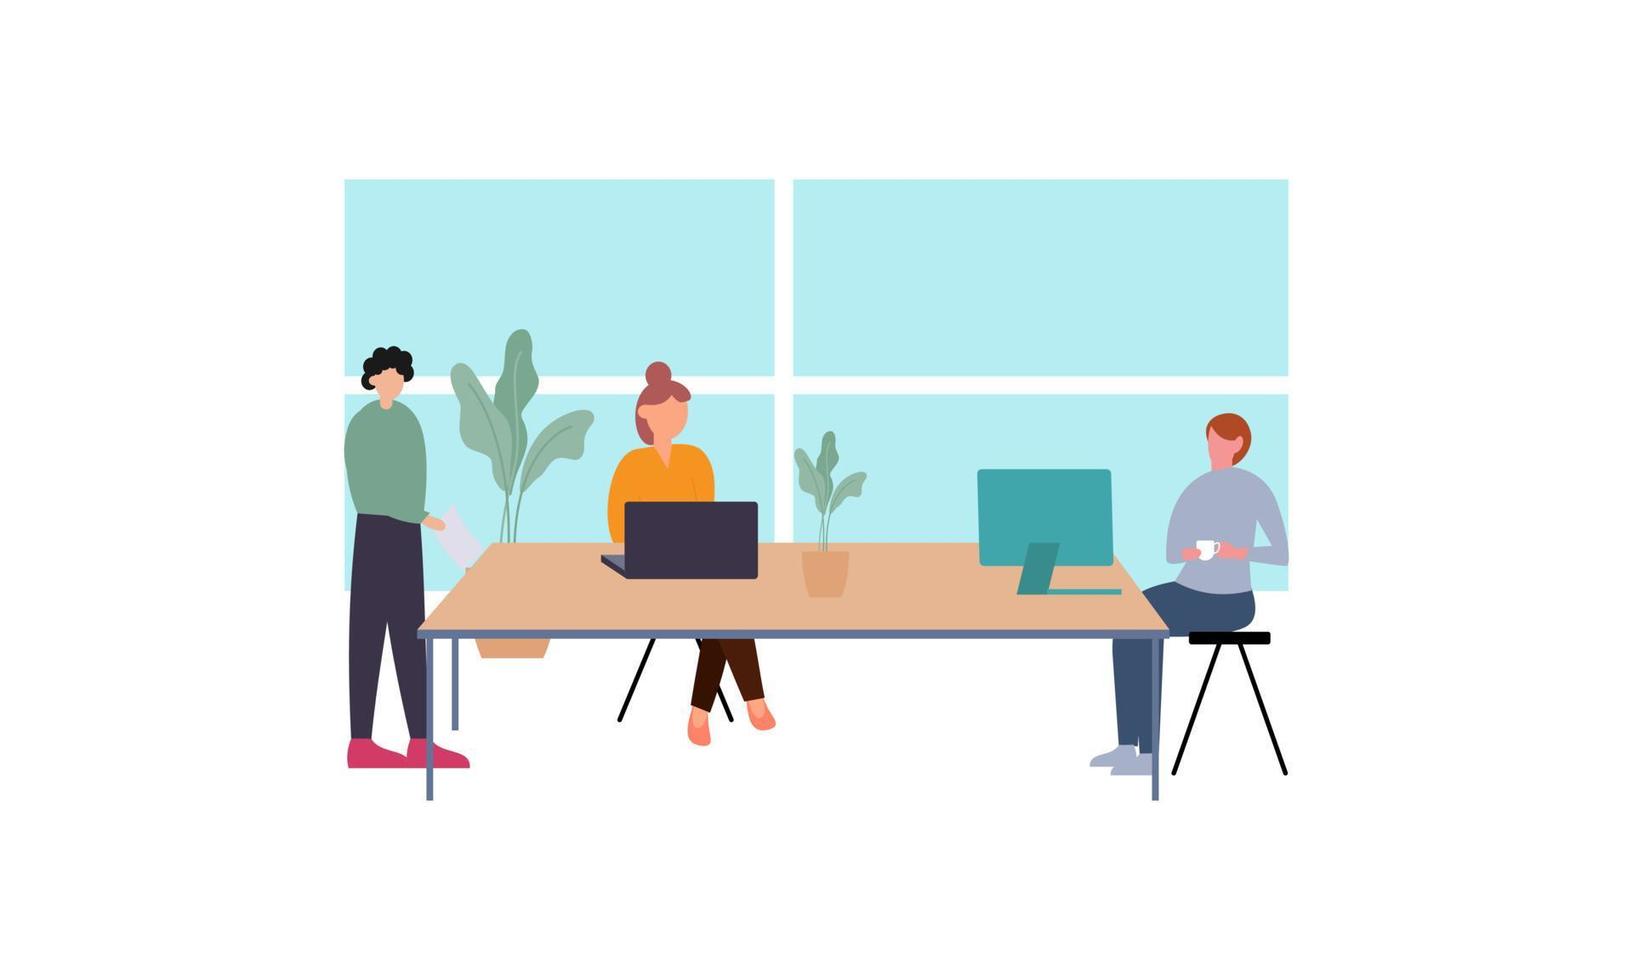 Group of office workers sitting at desks and communicating or talking to each other vector